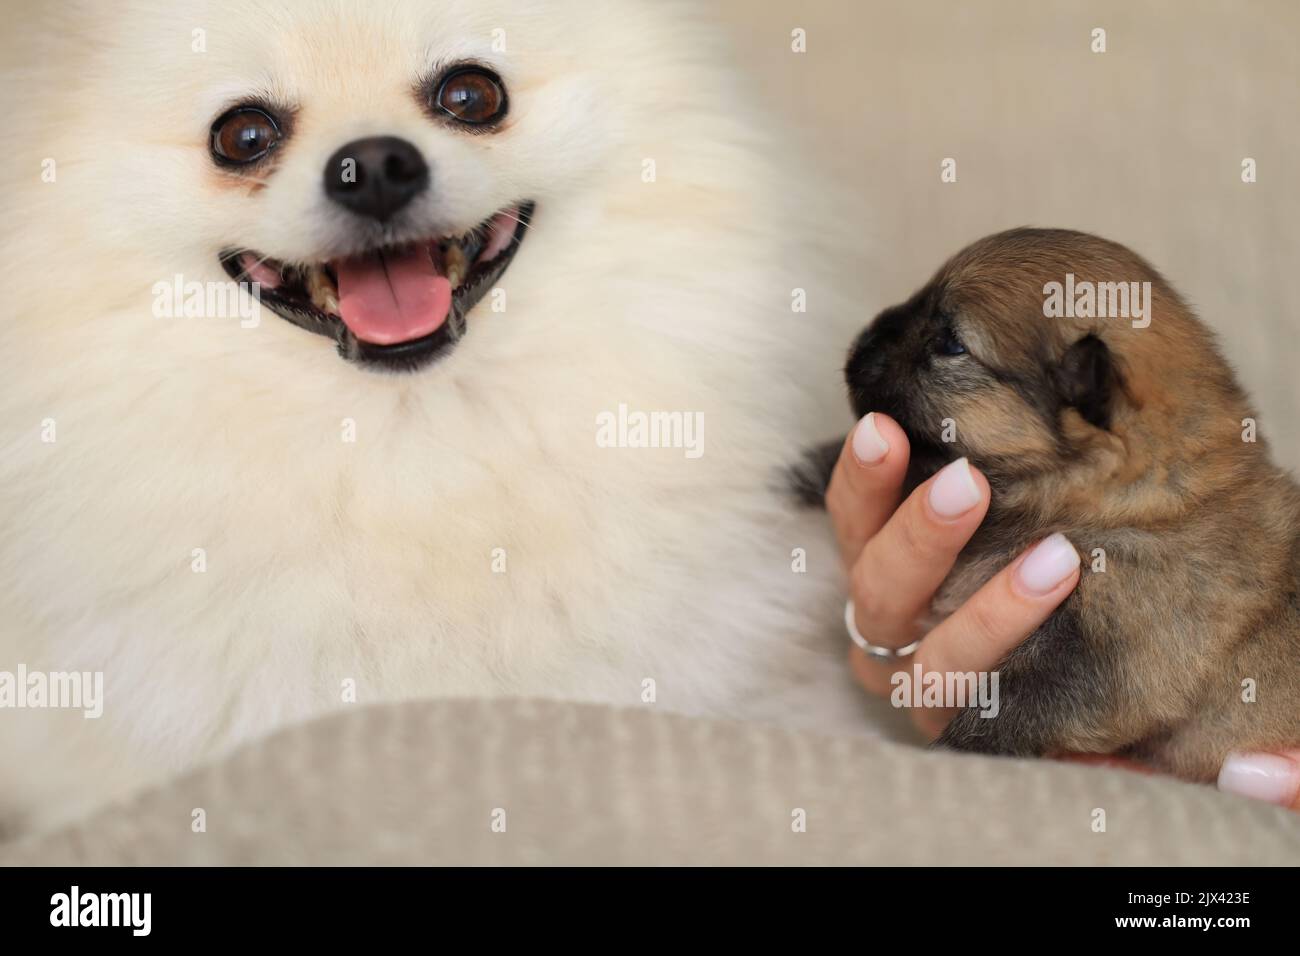 Cute fluffy adorable Pomeranian and little puppy Stock Photo